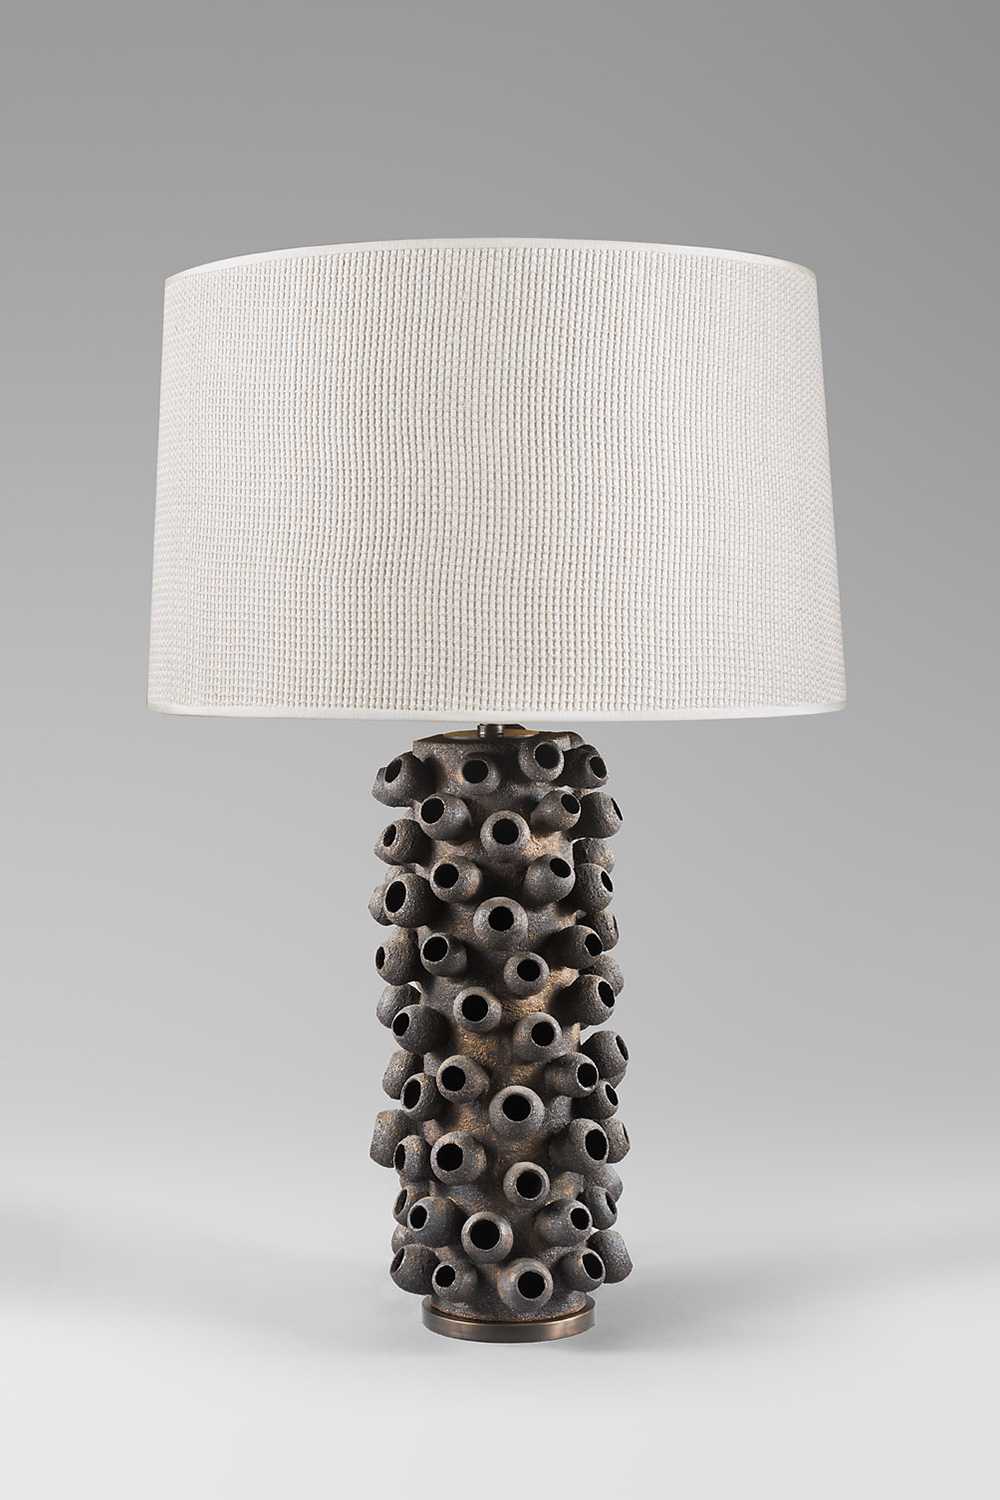 Large textured “Tentacle” lamp